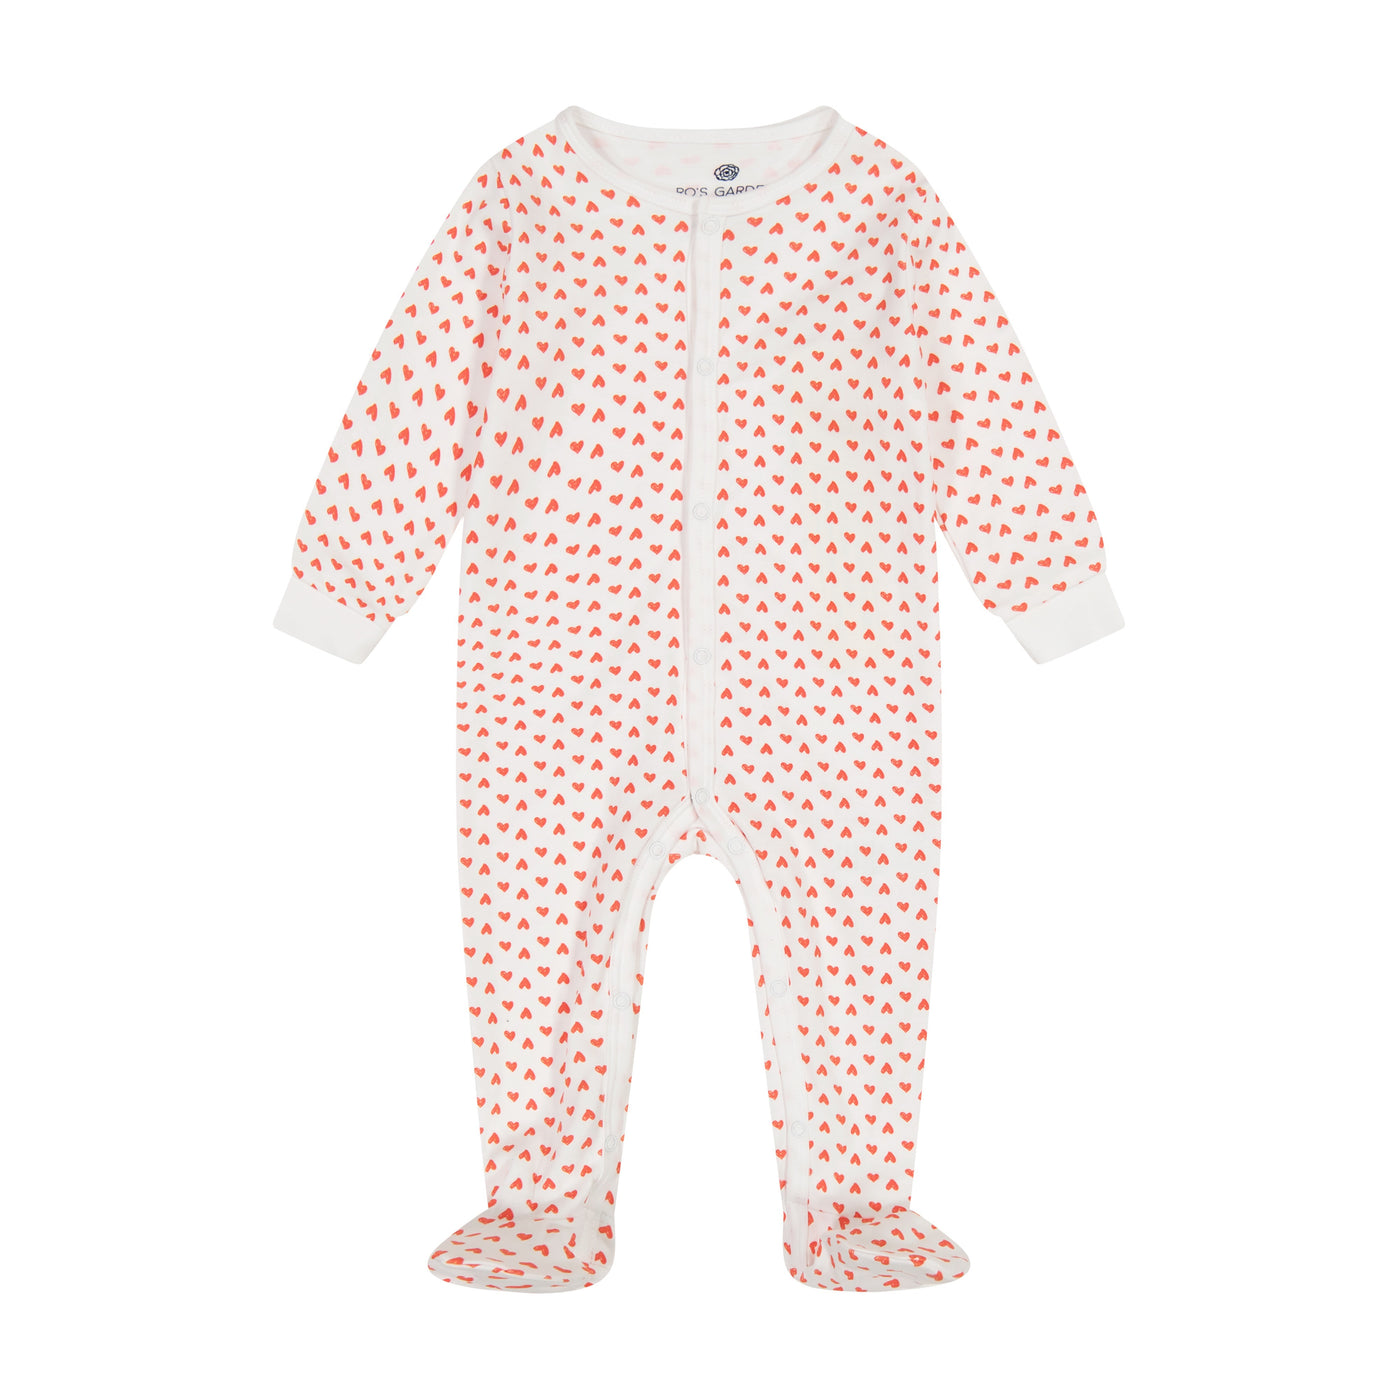 CASEY INFANT PAJAMA SUIT AMOUR RED